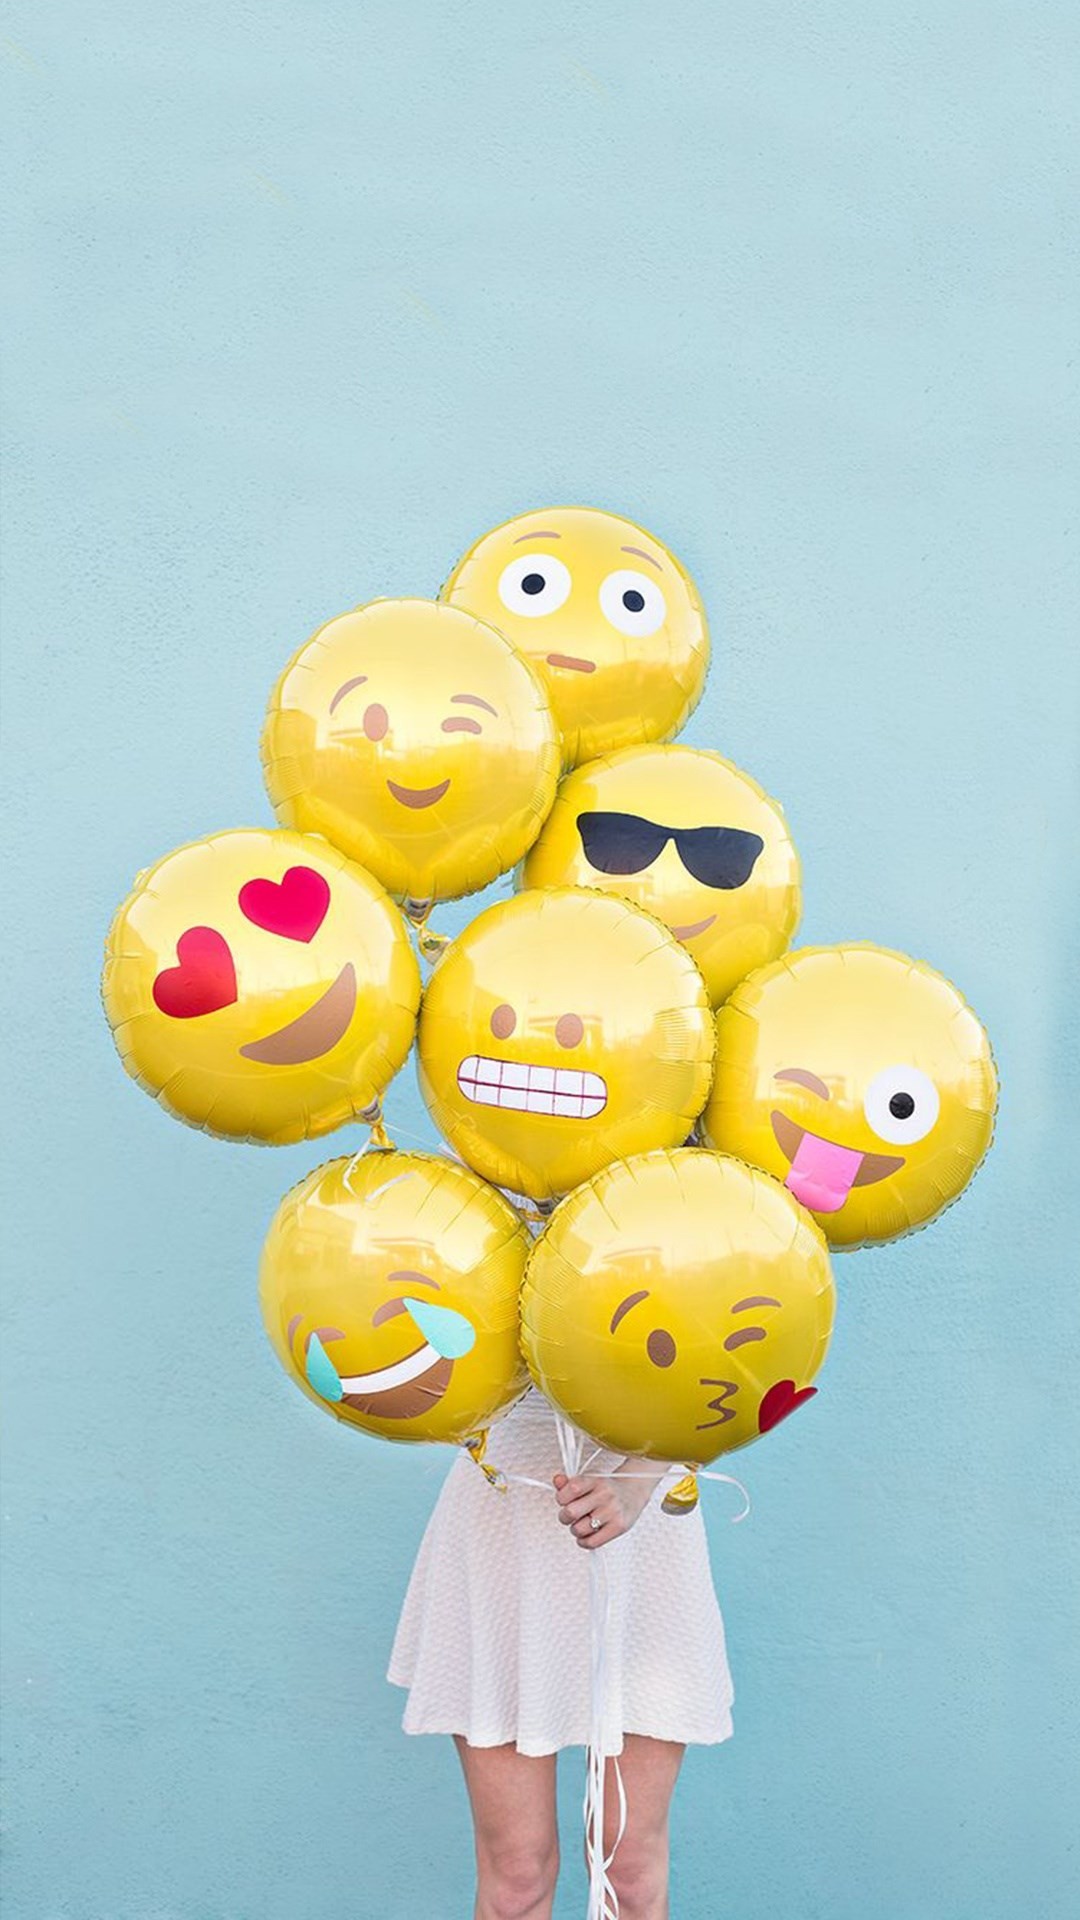 1080x1920 ... Abstract Funny Cute Emoji Balloons iPhone 8 wallpaper.